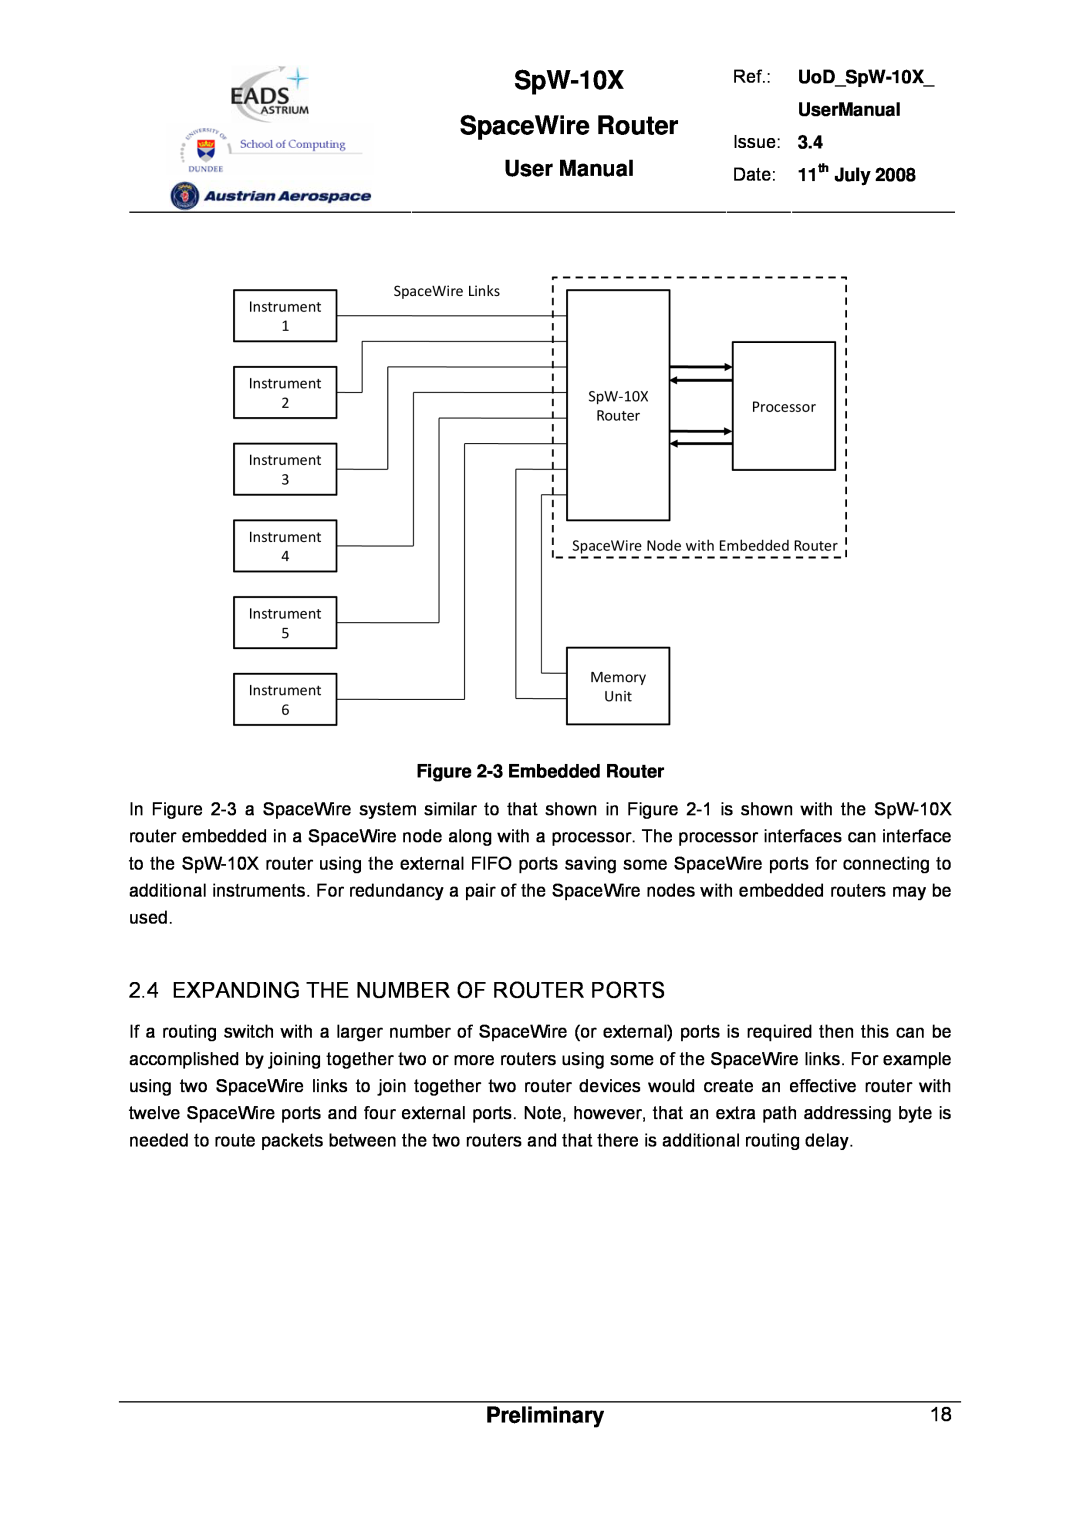 Atmel SpW-10X user manual Expanding The Number Of Router Ports, SpaceWire Router, User Manual, Preliminary 